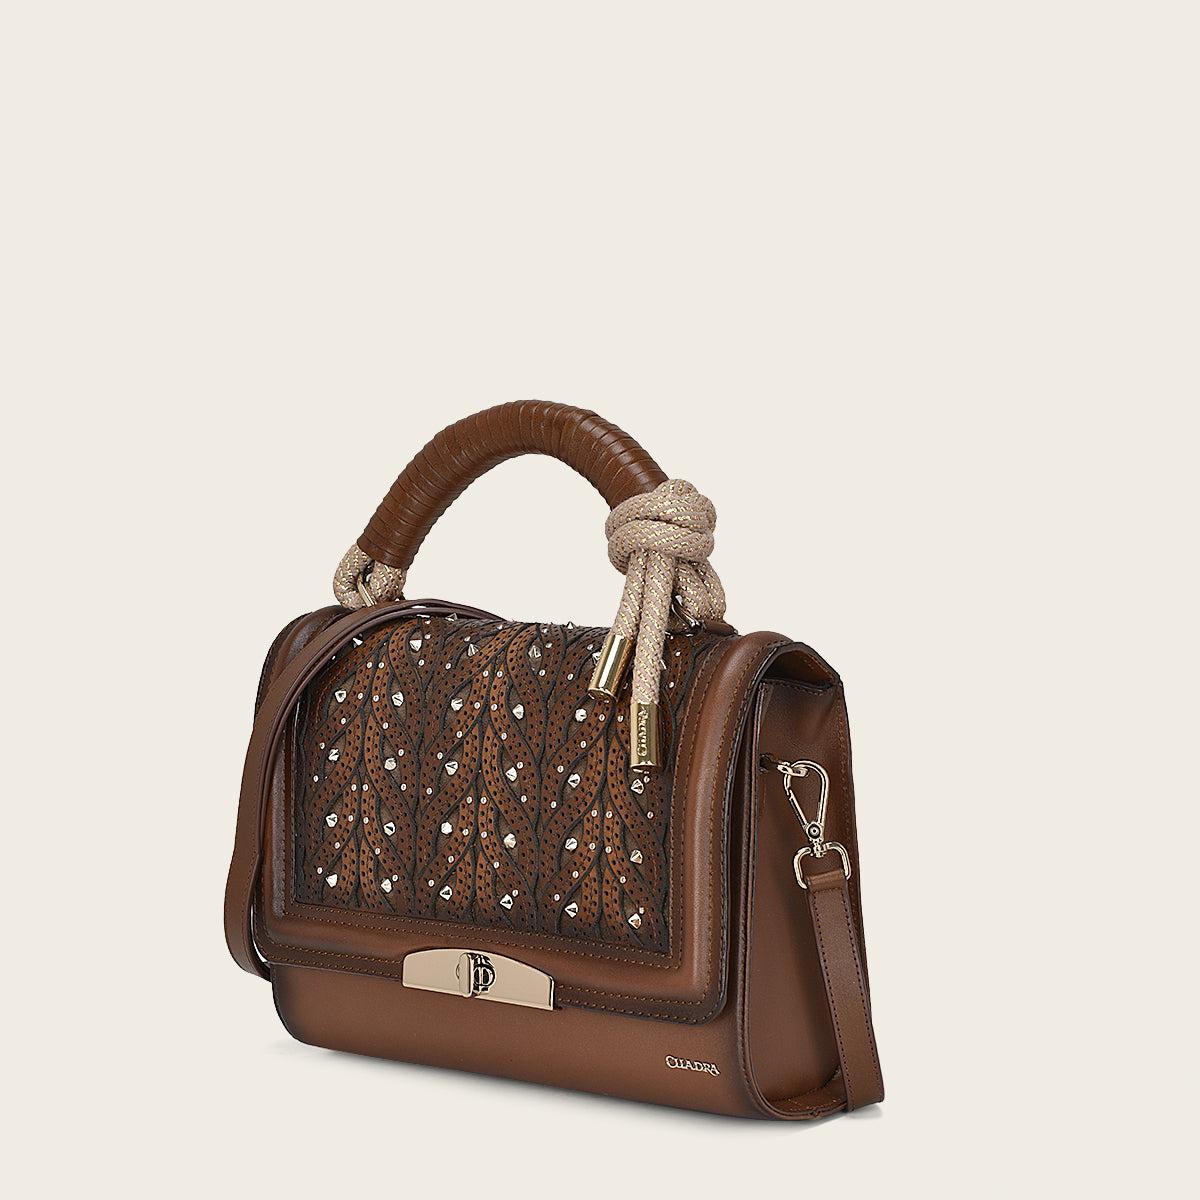 Brown handcrafted handbag with a high detailed stitching